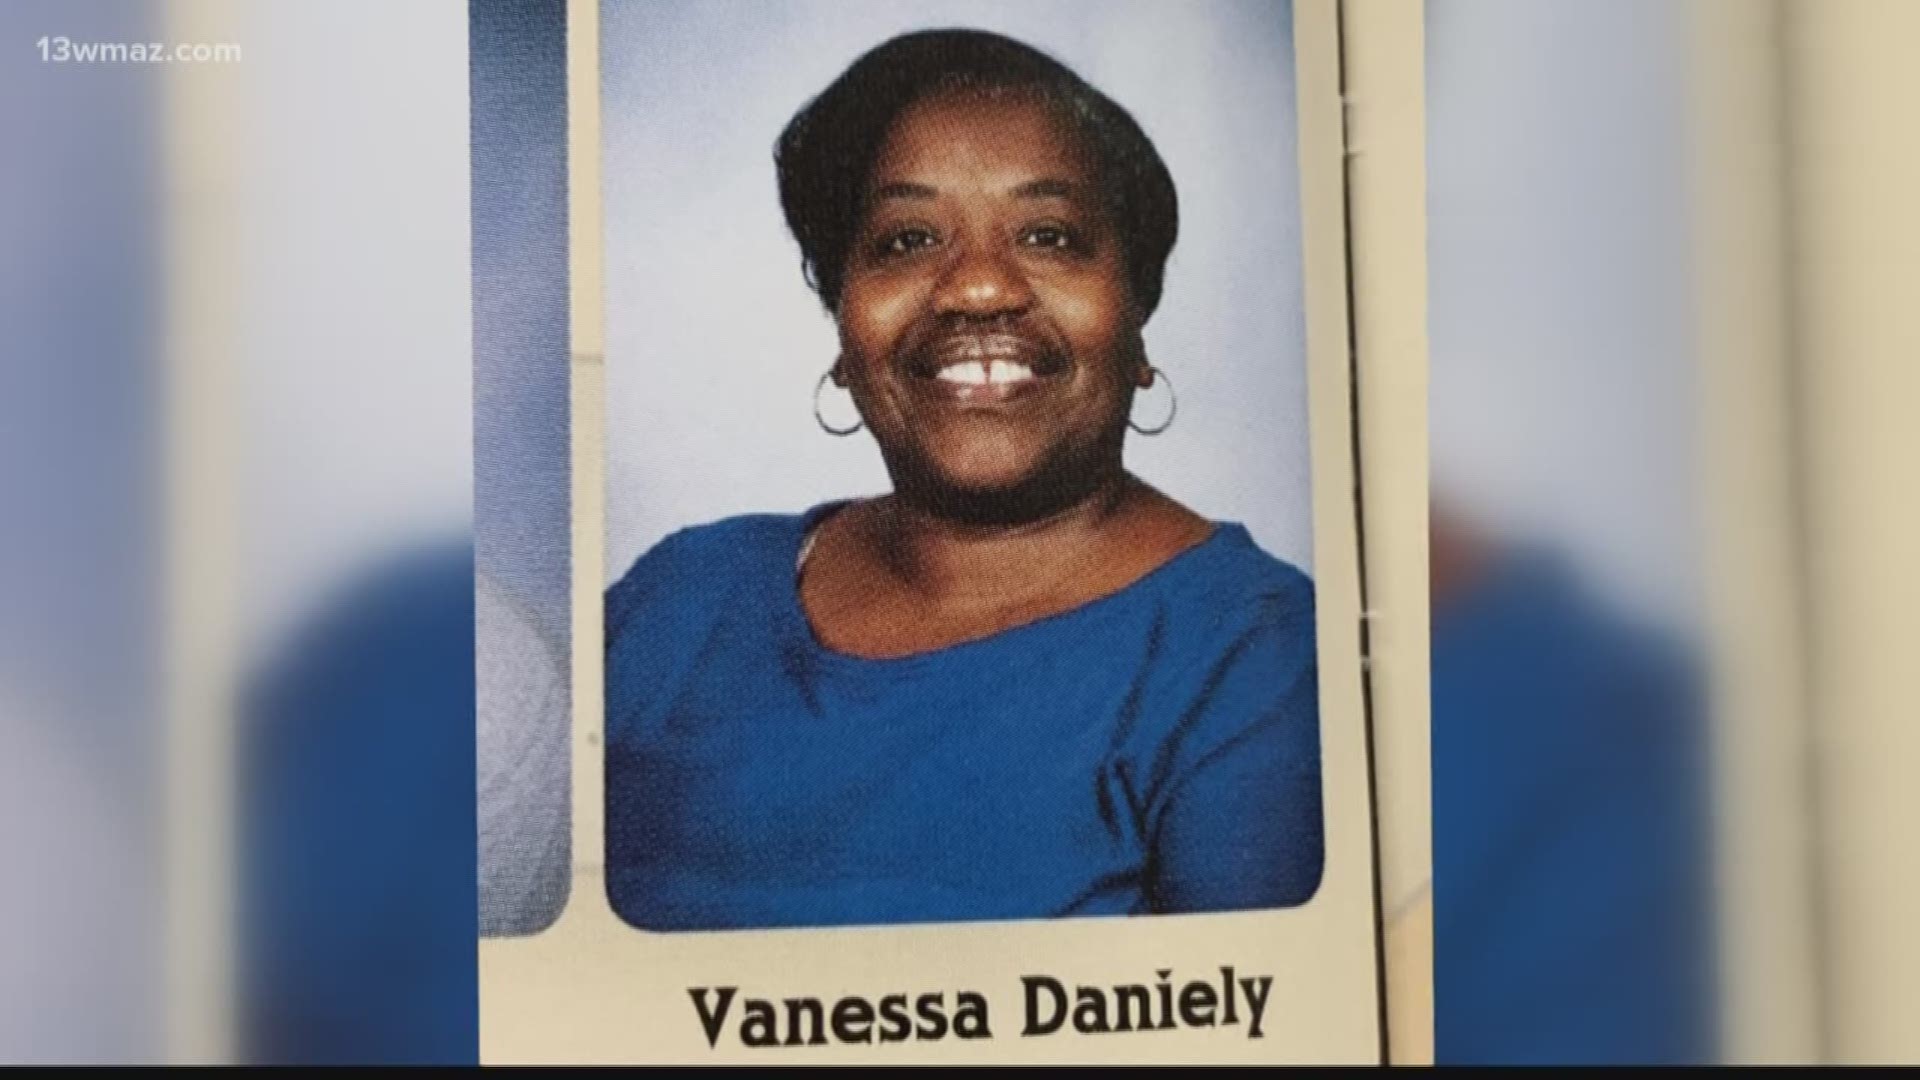 Vanessa Daniely was hospitalized after a tornado hit her home on Sunday on Greer Road. She's a teacher at Peach County High School, and students and coworkers are missing her in her absence.